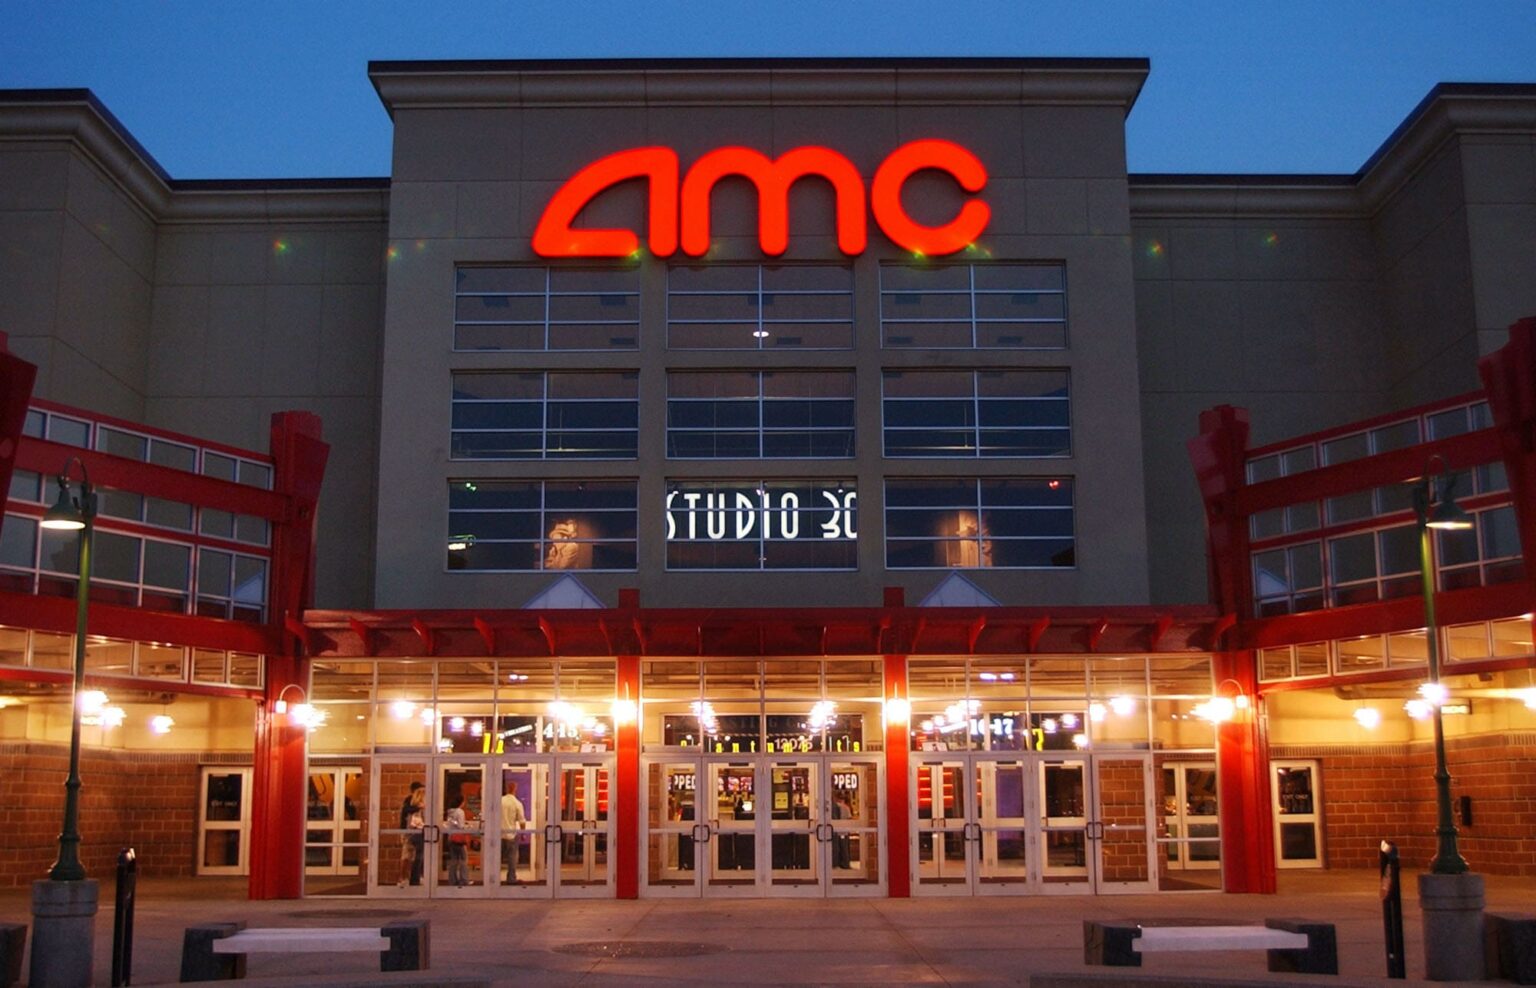 AMC theater stock is through the roof right now, but does that mean the company is doing well? Take a look at the surprising situation behind the scenes.